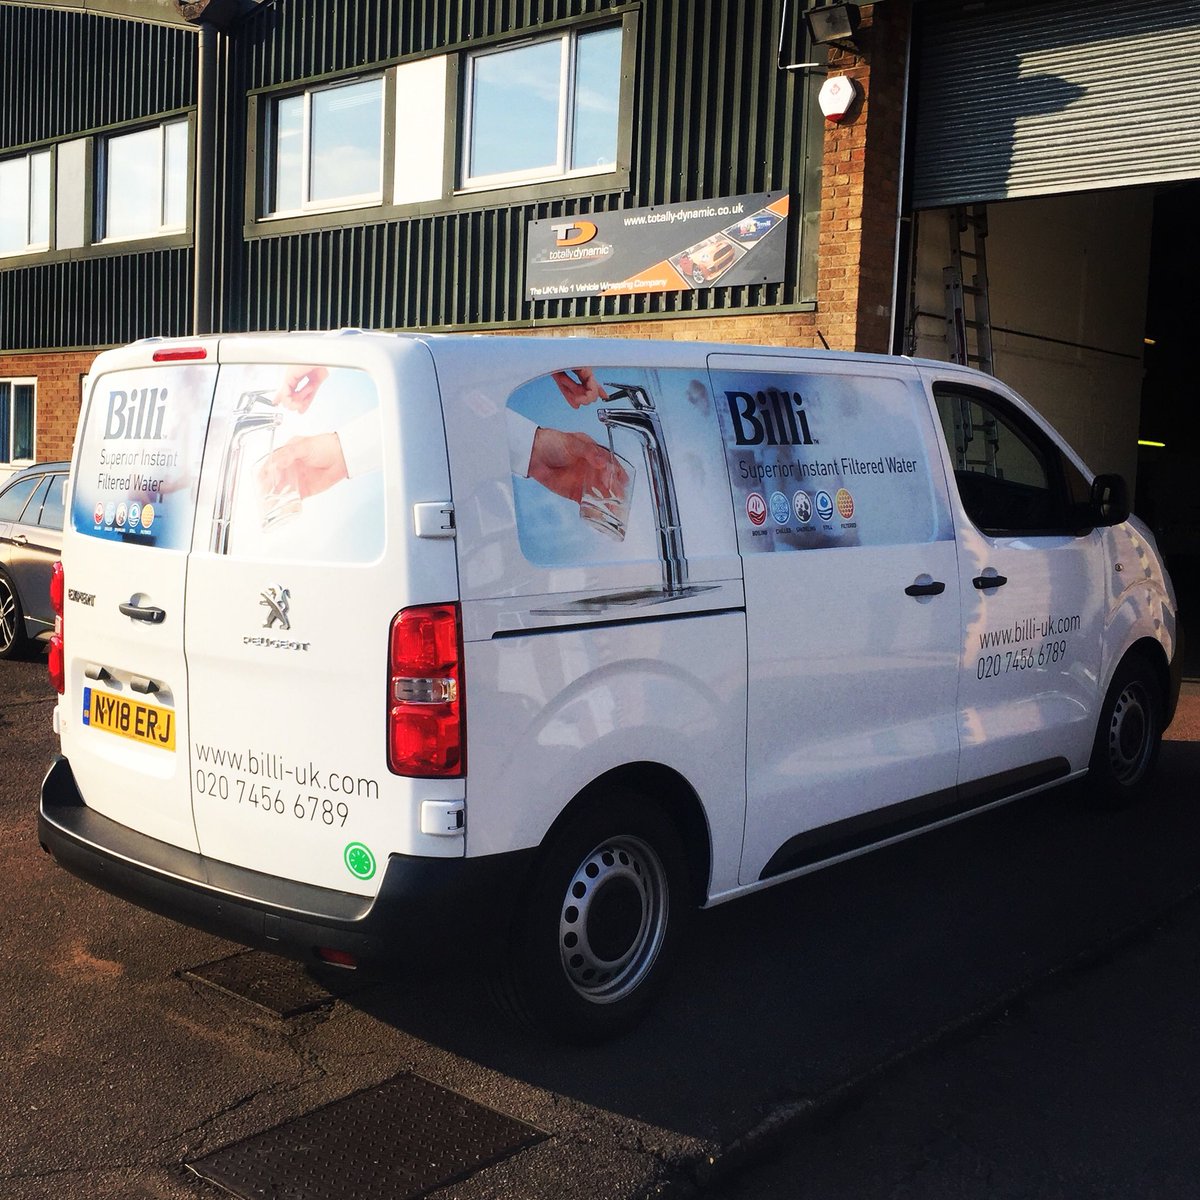 First of the @Billi_Taps new Peugeot Experts collected with 3 more to do this week #Peugeot #expert #norwich #norfolk #wrapping #billiuk #billi #graphics